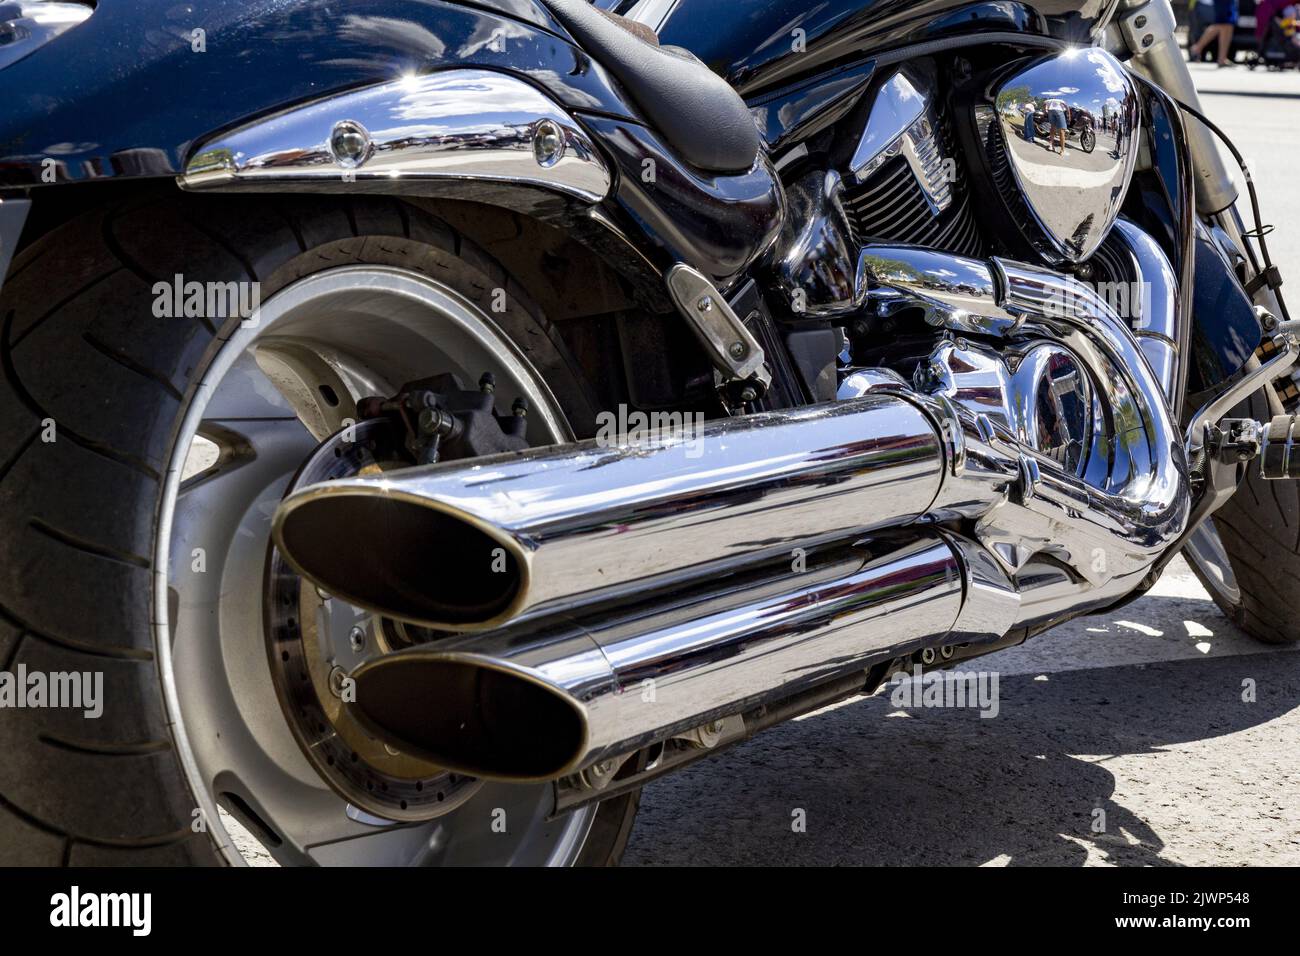 A fragment of a powerful motorcycle located on a sunny day in the square. Stock Photo